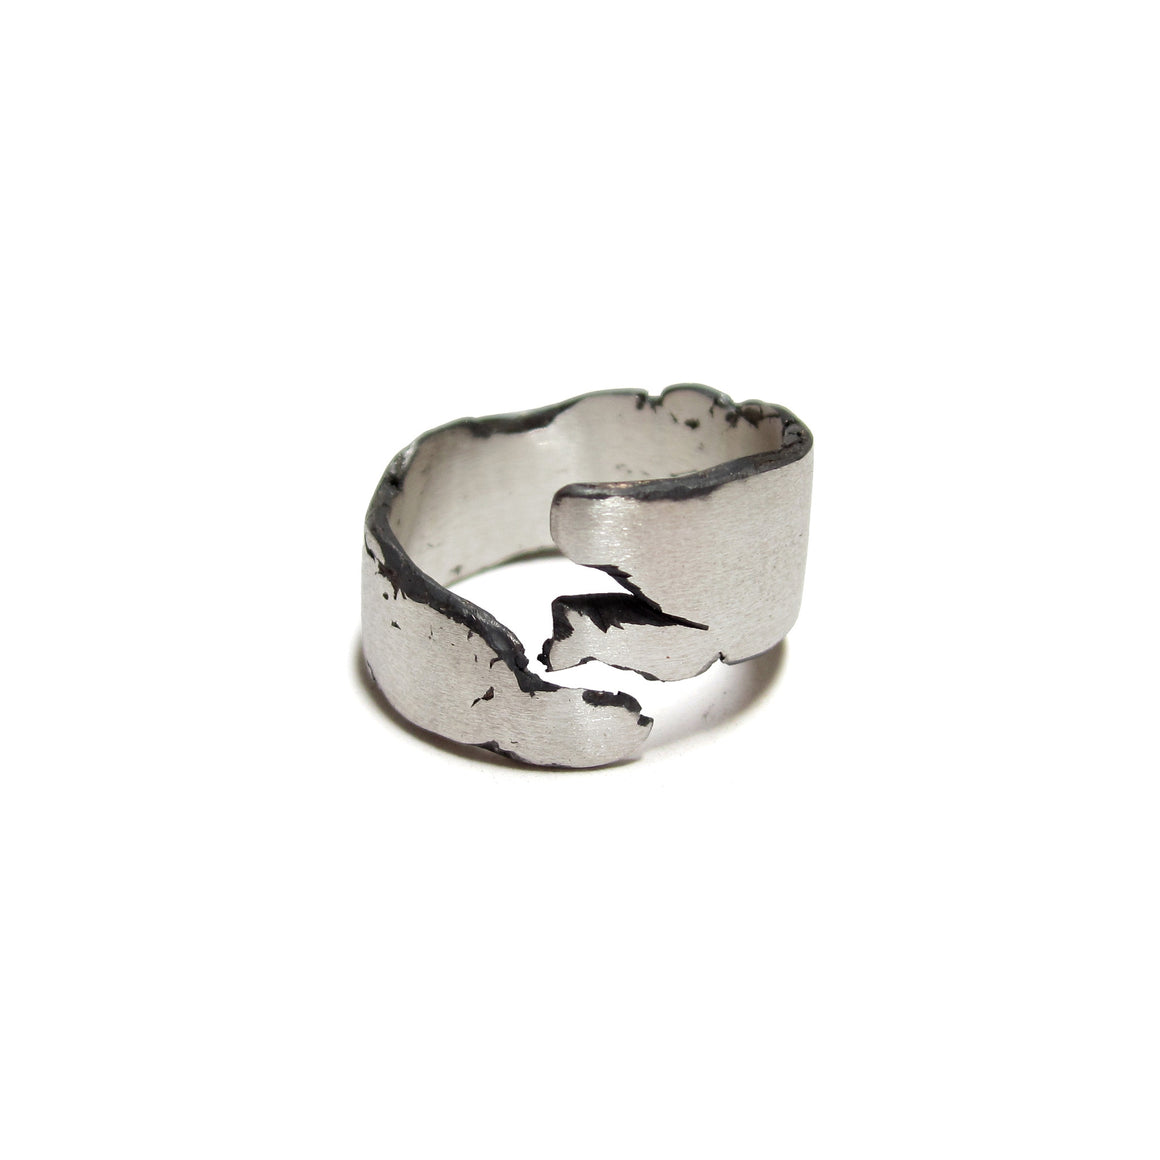 sterling silver cracked ring by Seth Papac